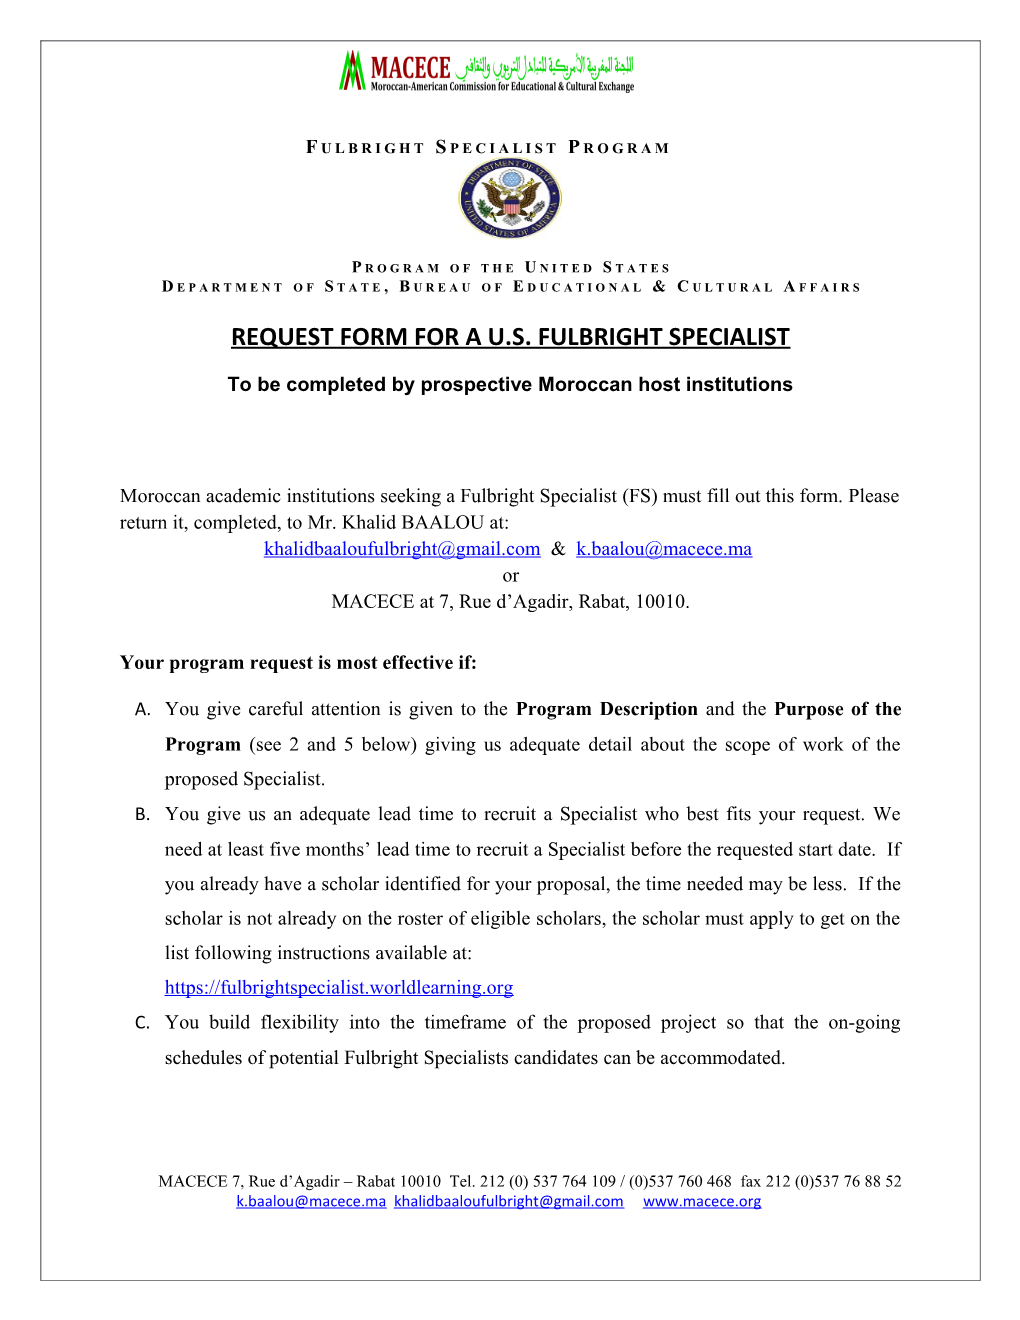 Request Form for a U.S. Fulbright Specialist